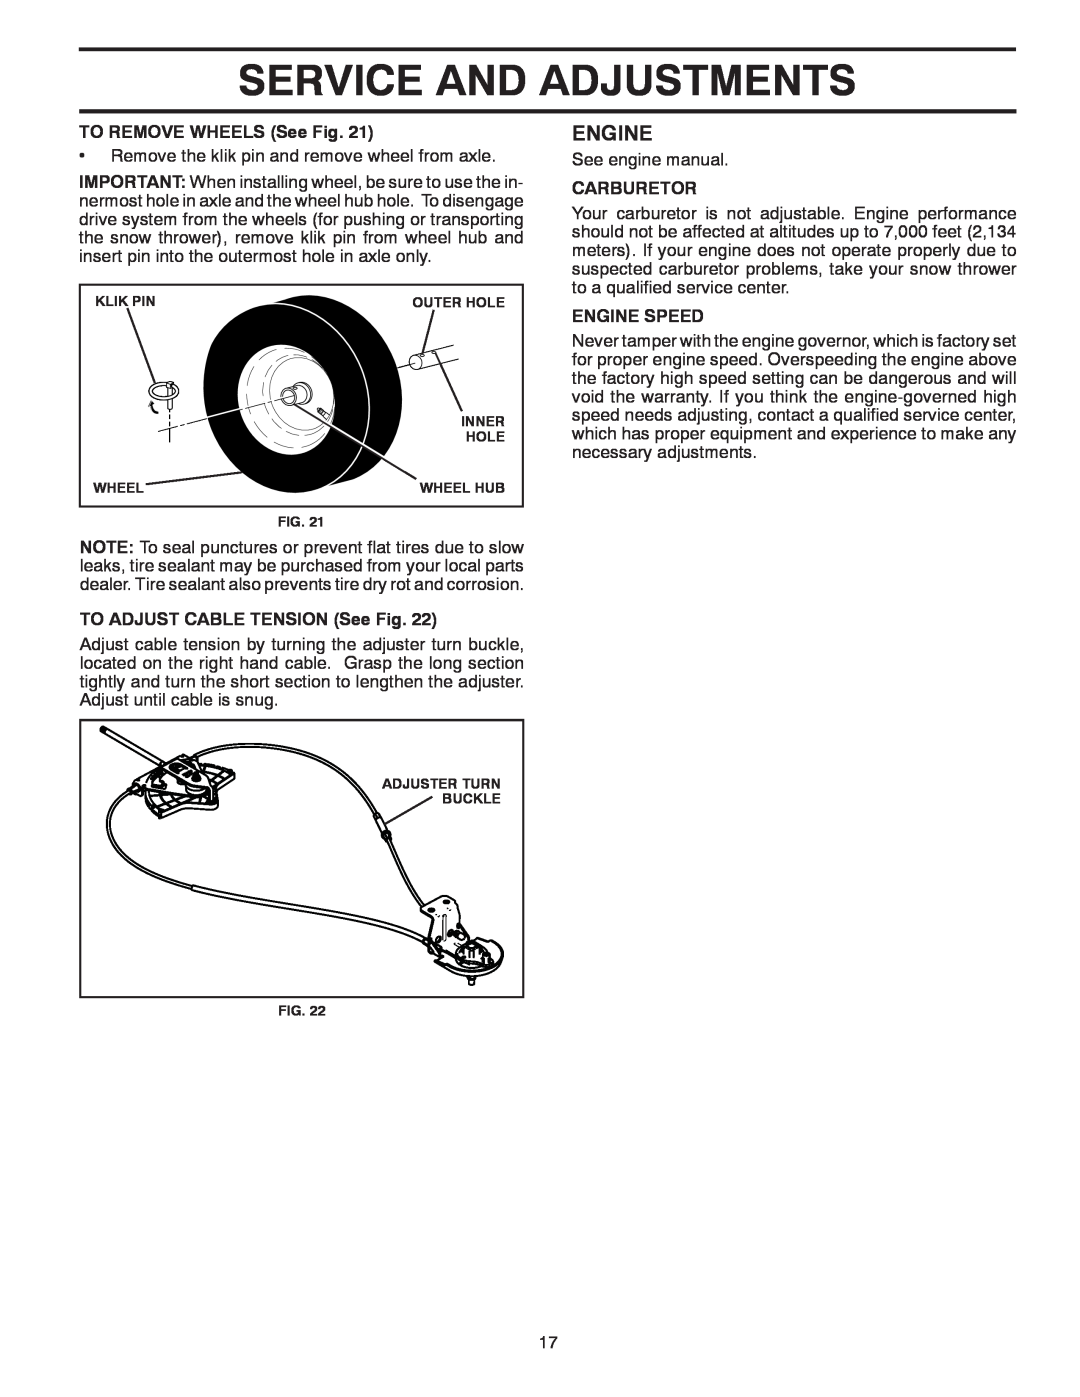 Poulan 96194000801 Service And Adjustments, Engine, TO REMOVE WHEELS See Fig, TO ADJUST CABLE TENSION See Fig, Carburetor 